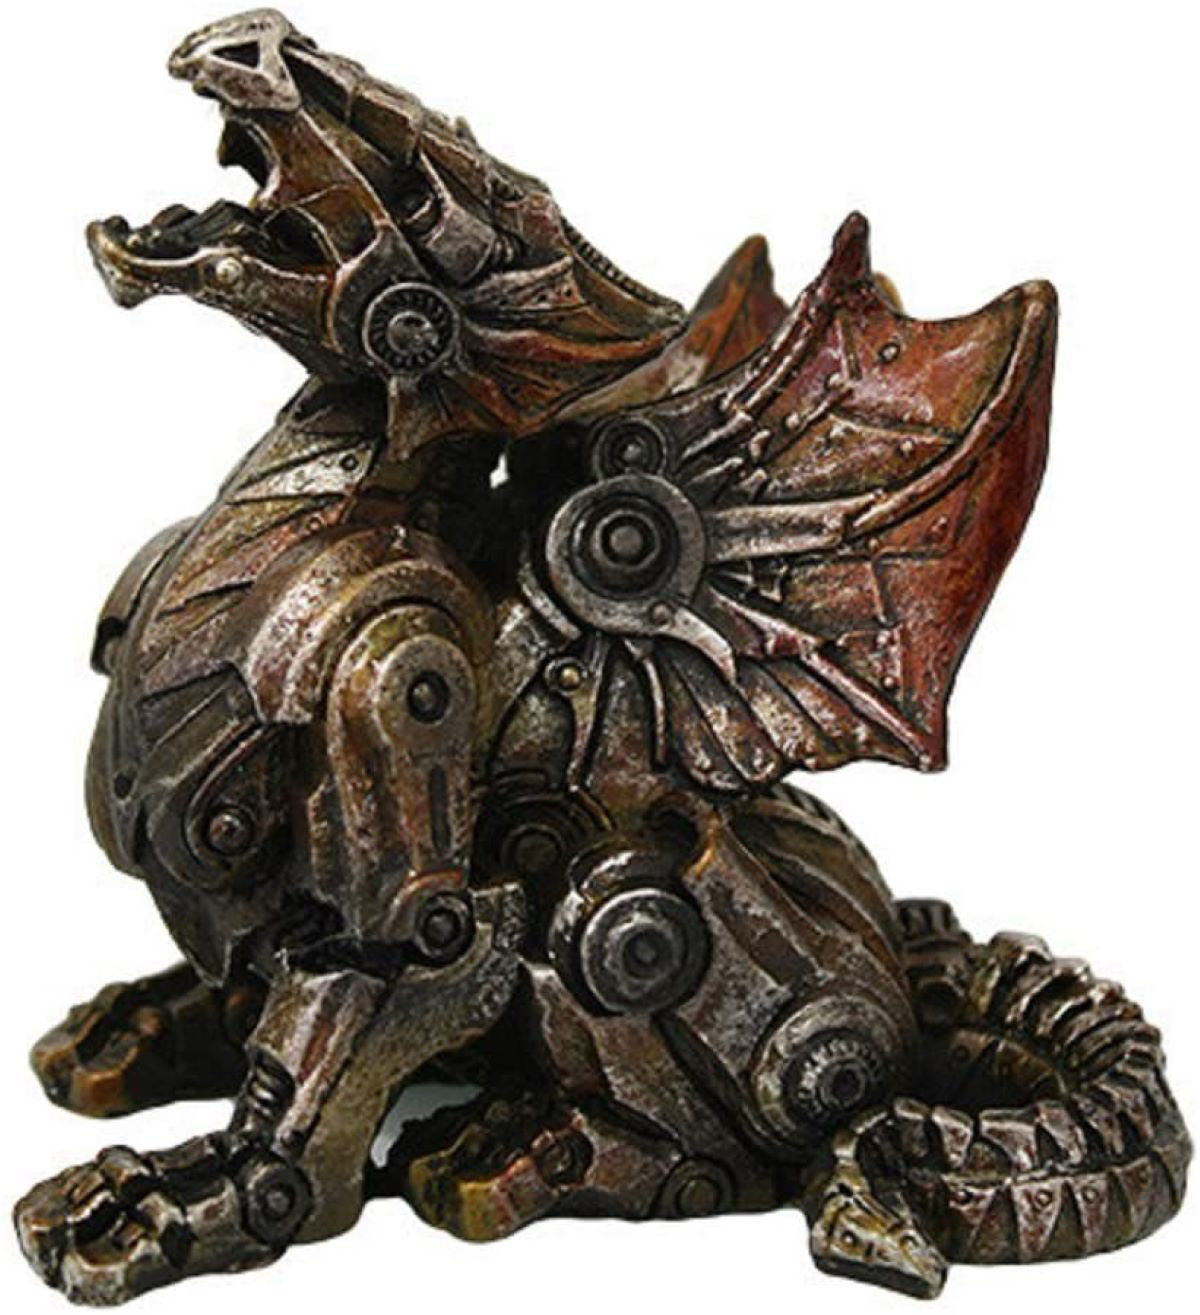 Set of 4 Steampunk Dragons on Skuls Figurines Ornaments Office Decor